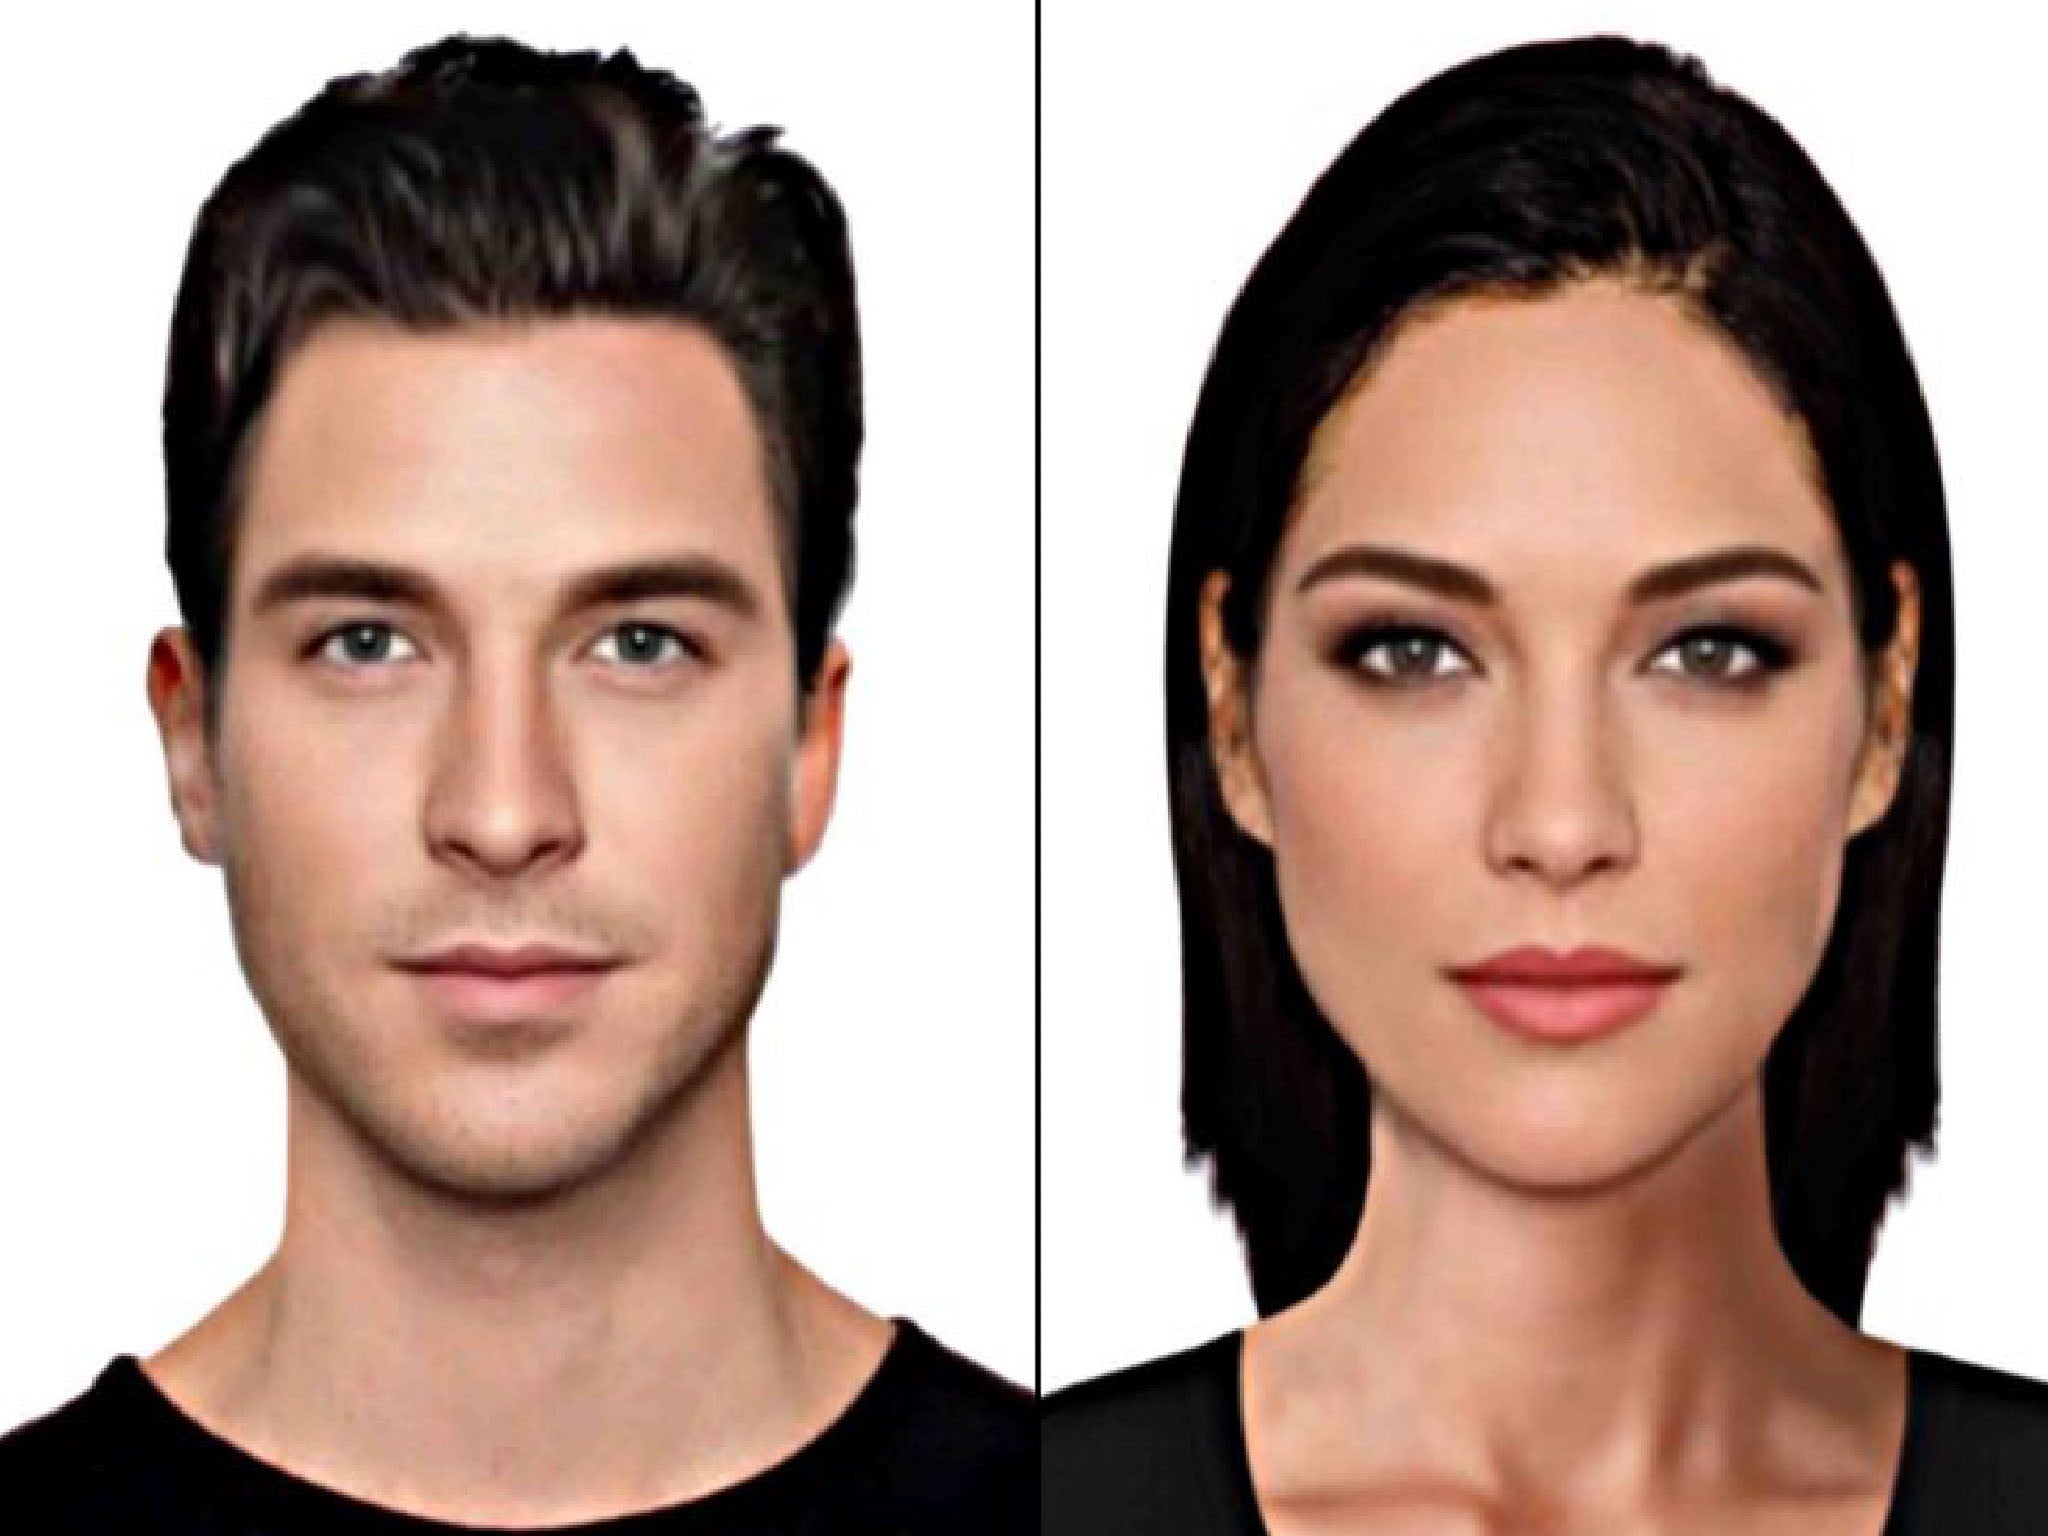 The Male And Female Faces Thought To Be The Epitome Of Beauty